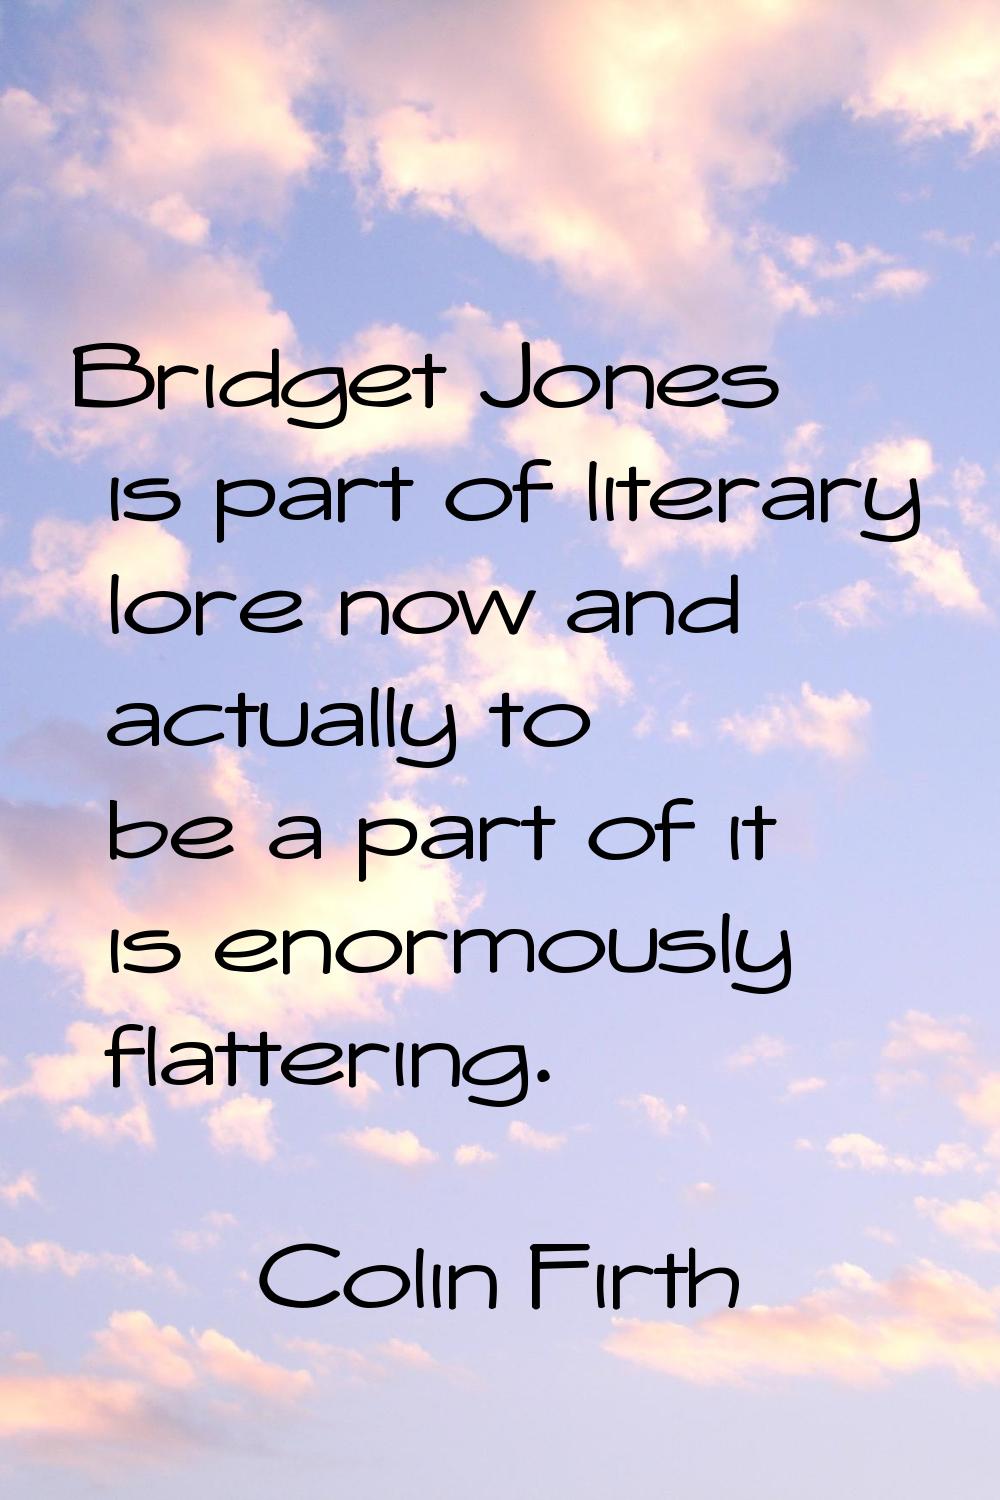 Bridget Jones is part of literary lore now and actually to be a part of it is enormously flattering